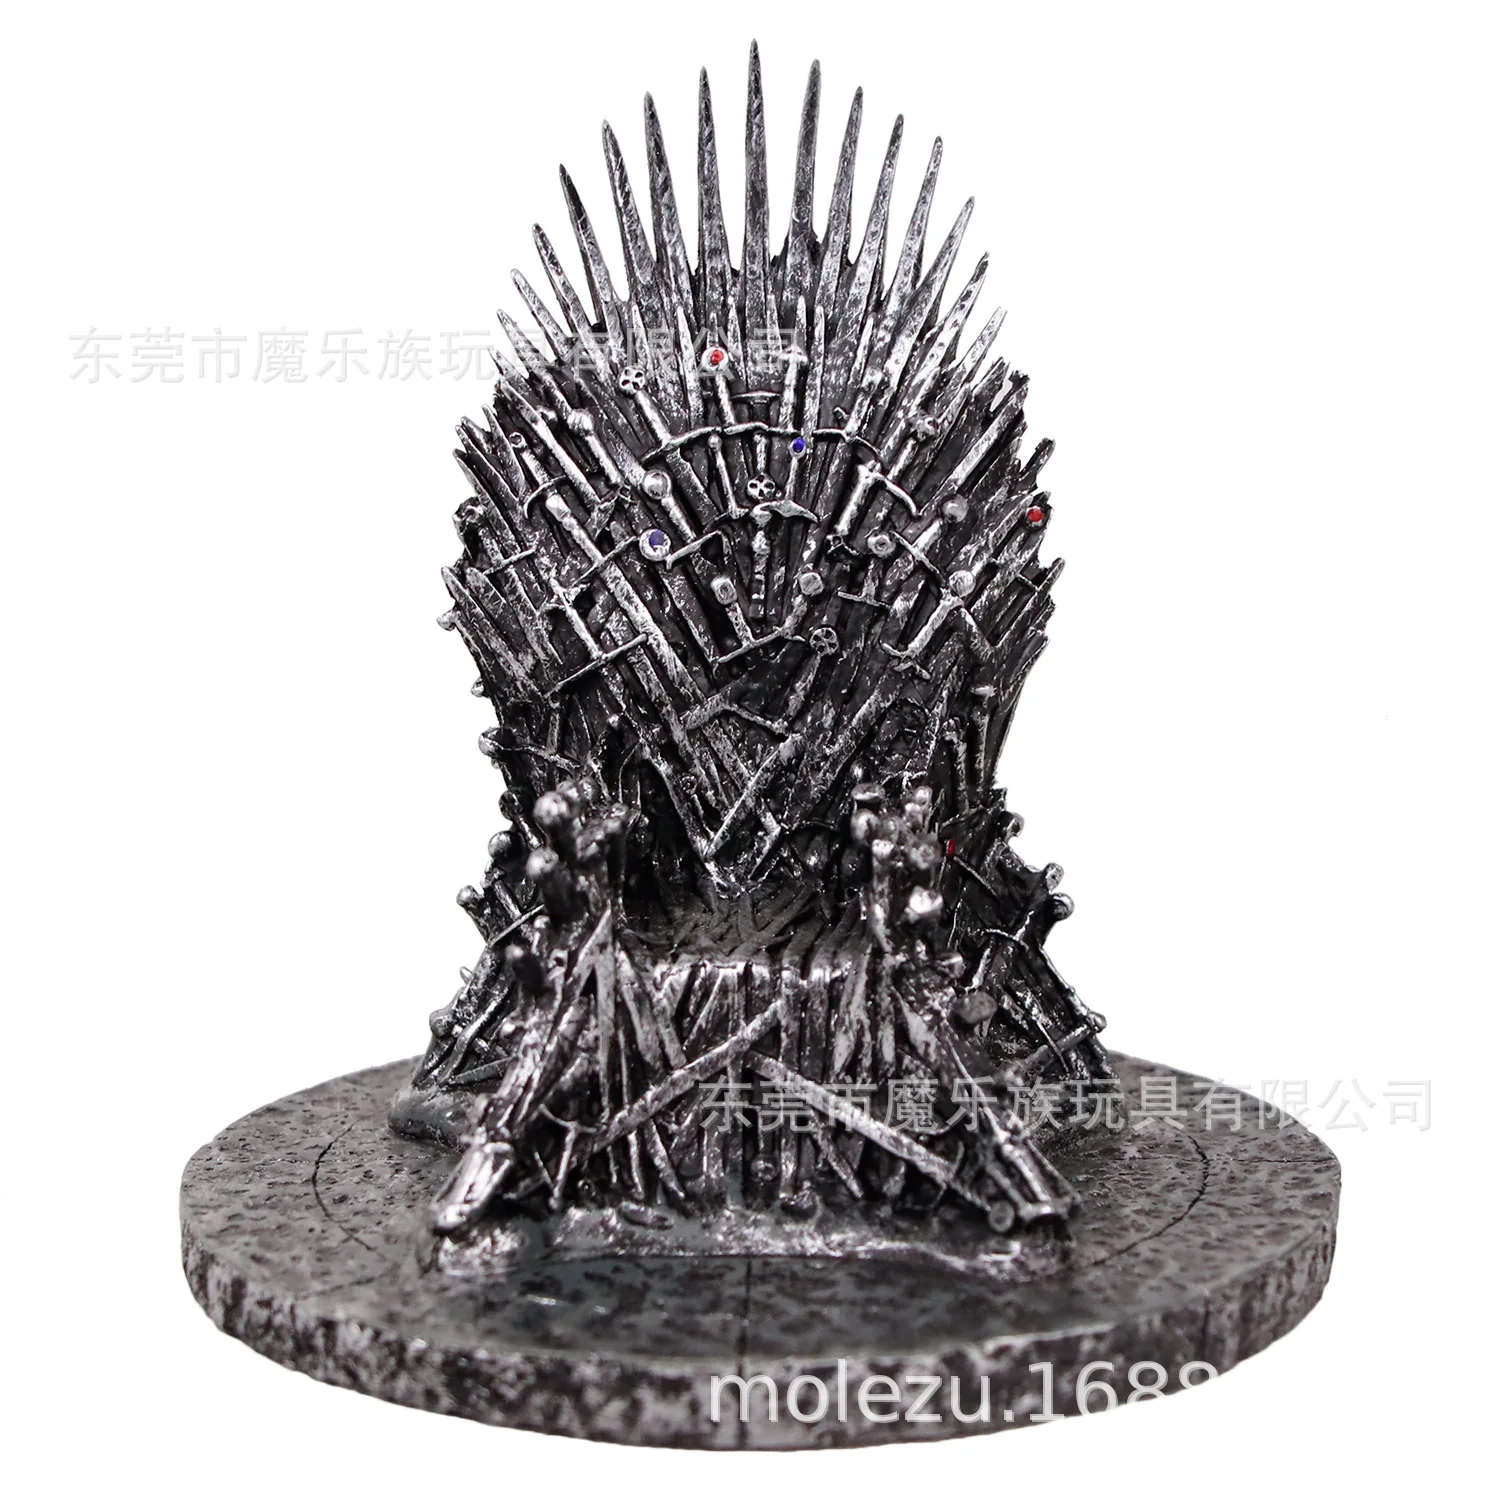 

Game of Thrones of Yu-gi-oh Seat Garage Kit Game of Thrones A Song of Ice And Fire Realistic Throne Garage Kit Model Small Thron